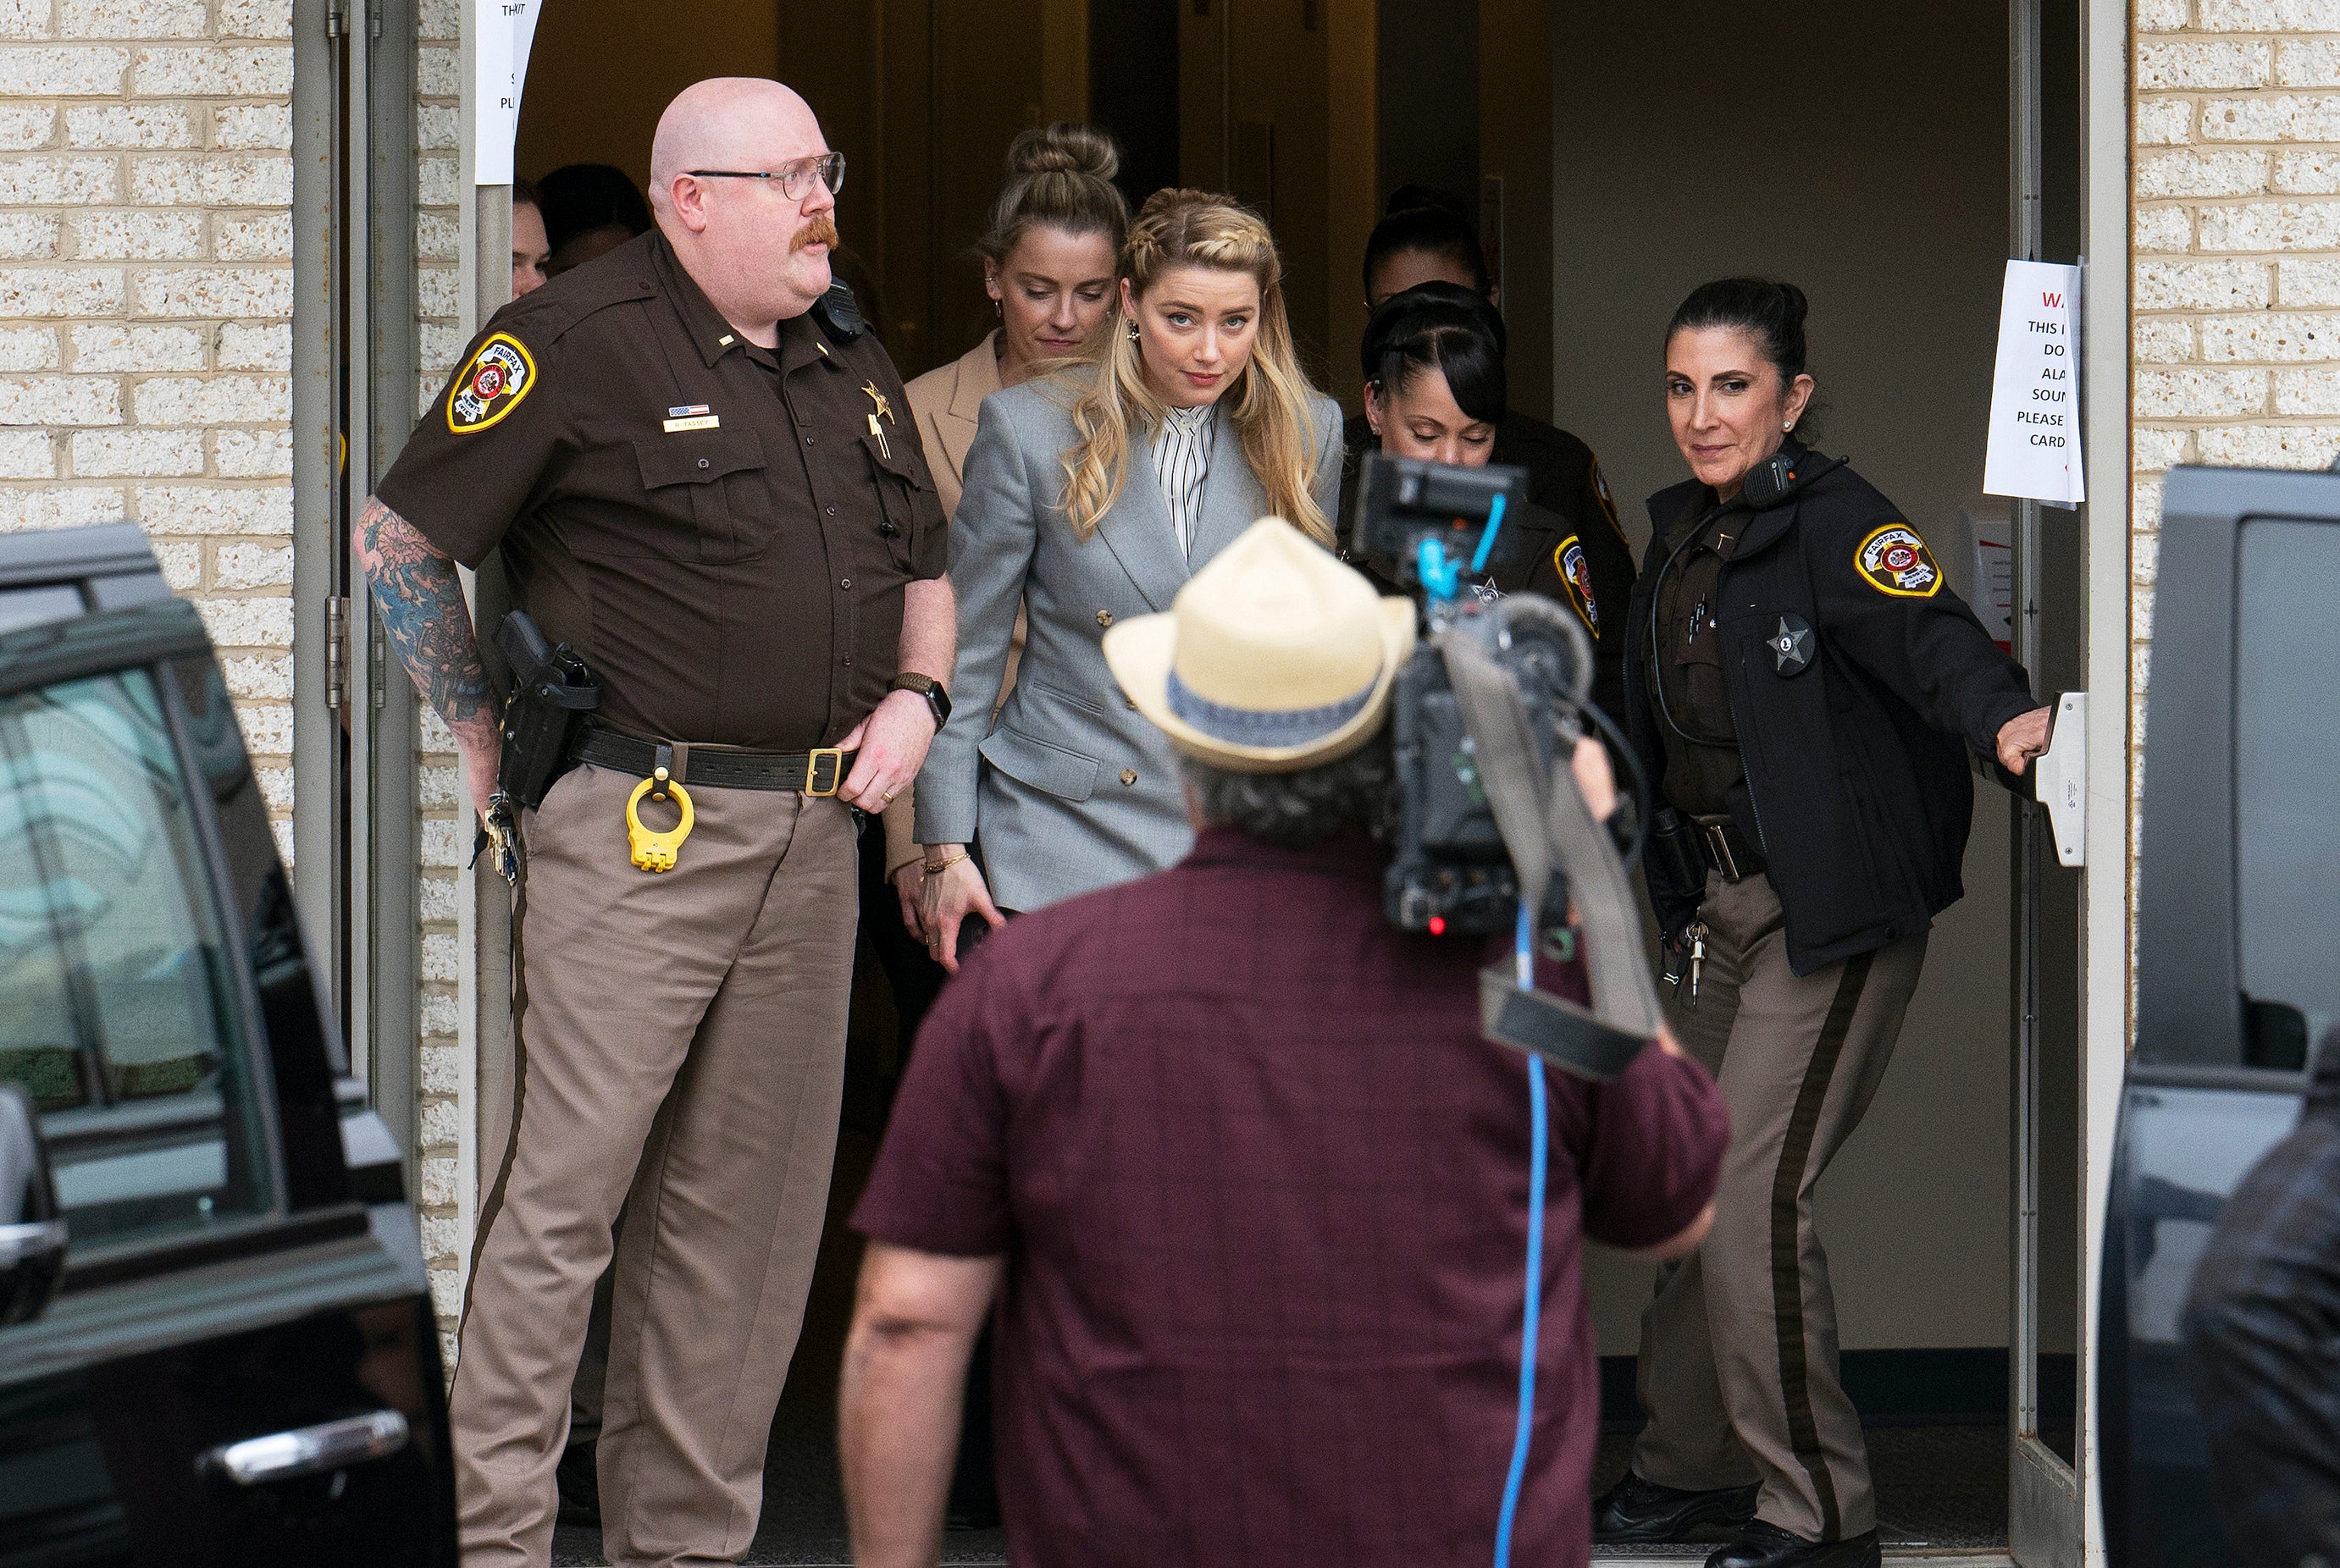 Actress Amber Heard departs the Fairfax County Courthouse Friday, May 27, 2022 in Fairfax, Va